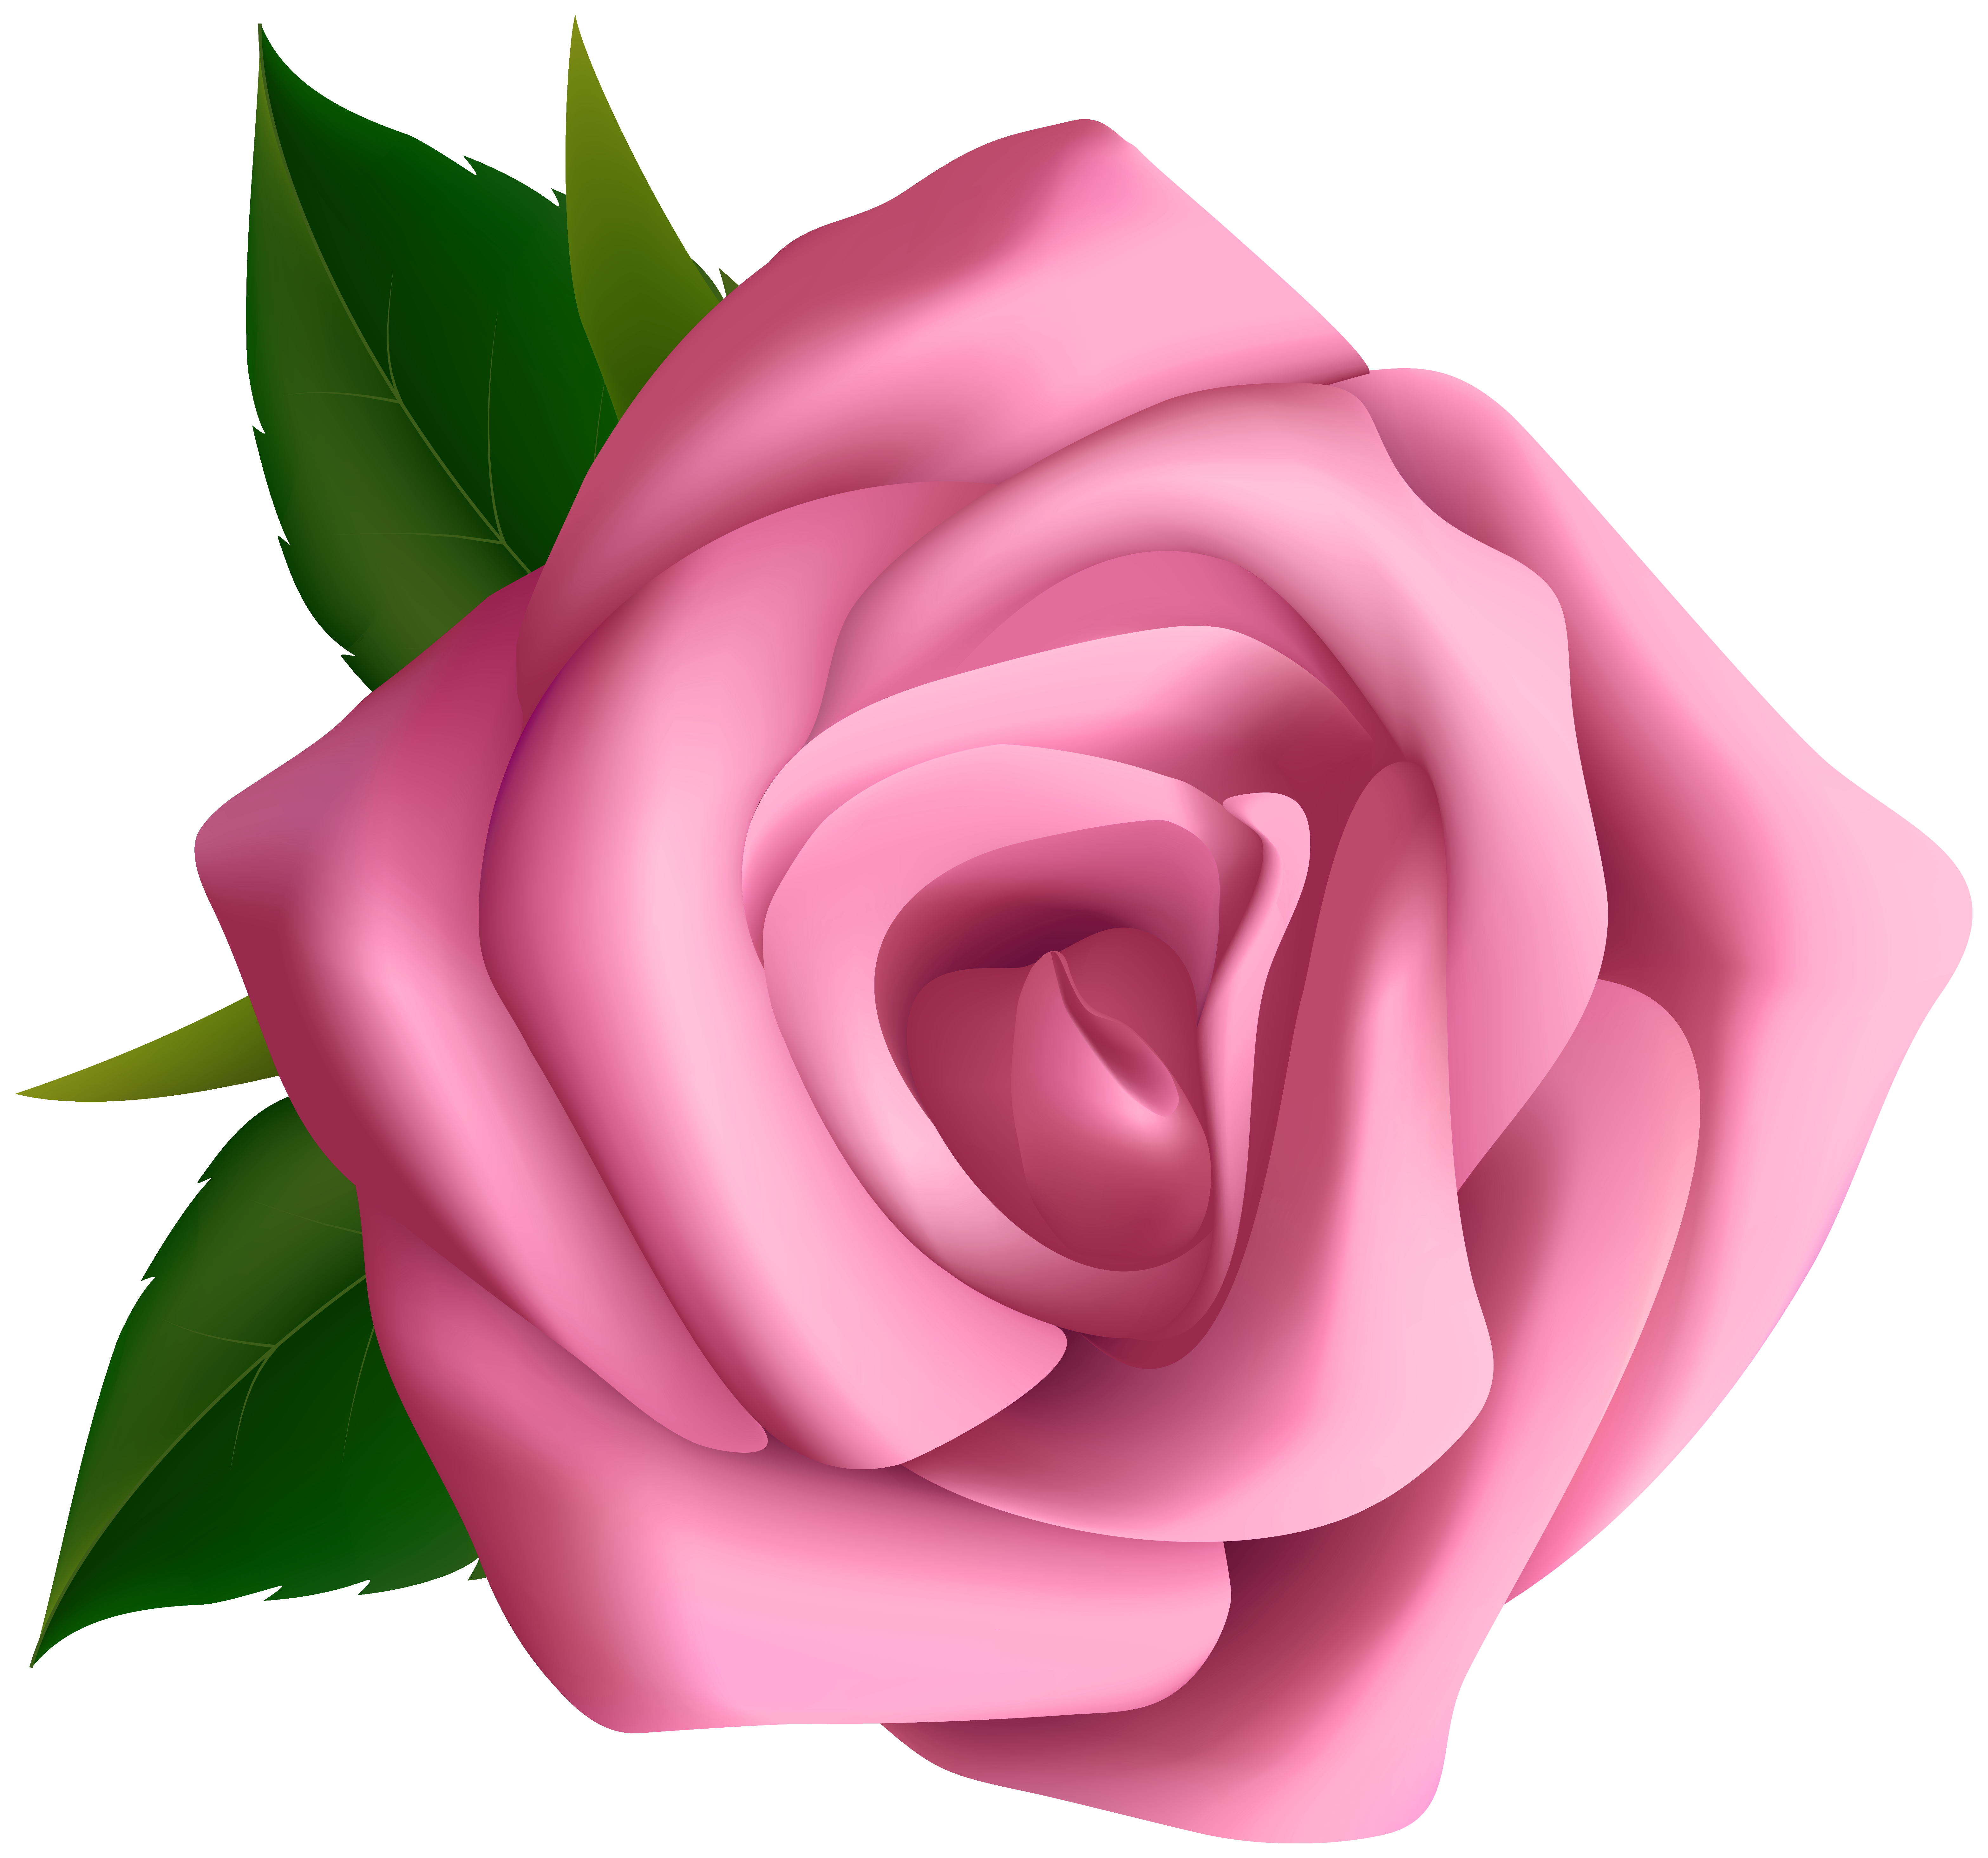 Large pink rose clipart blumen pink roses clip cliparting